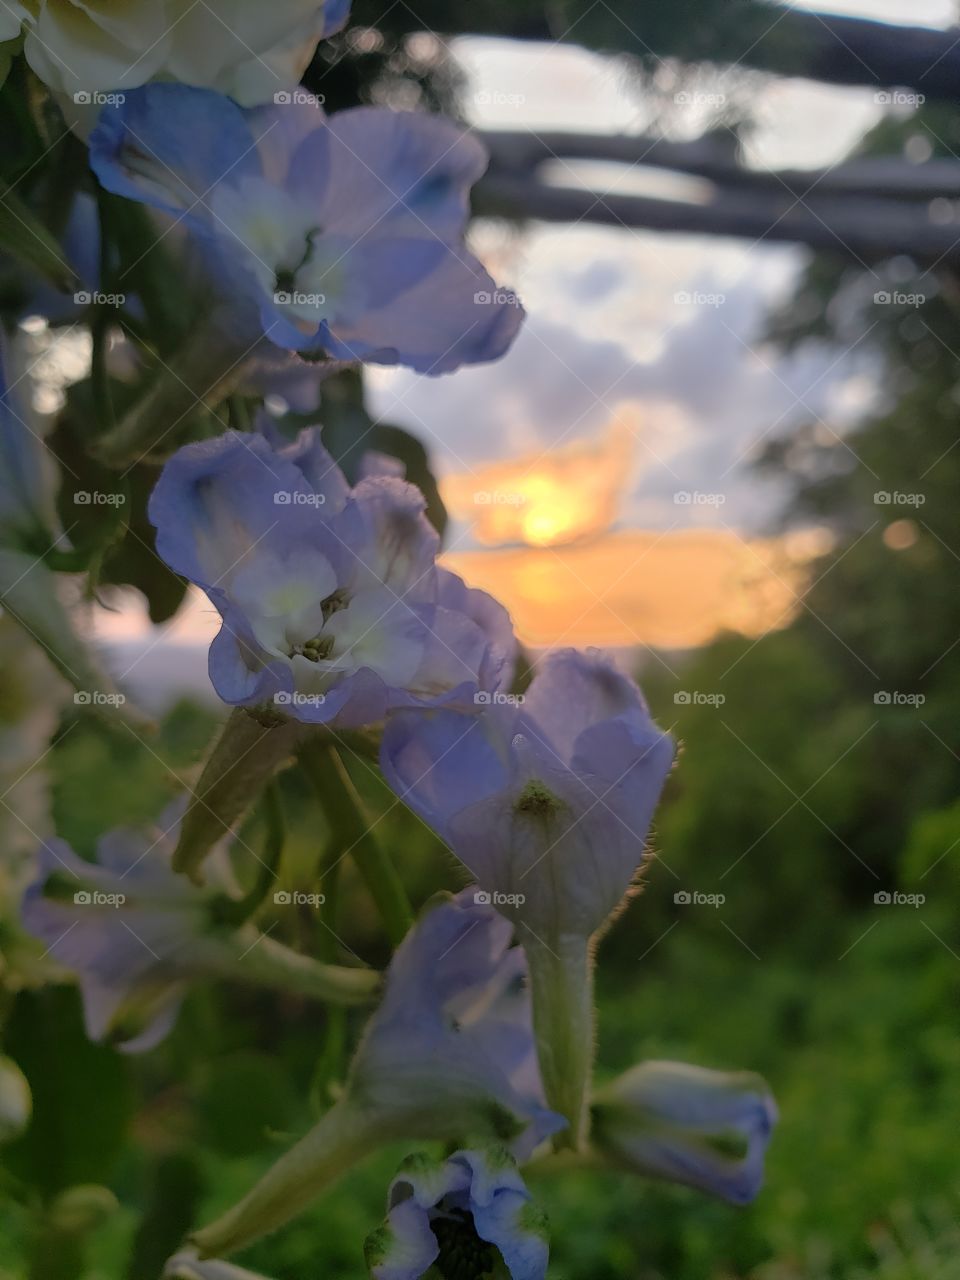 Sunsets, flowers, and mountains